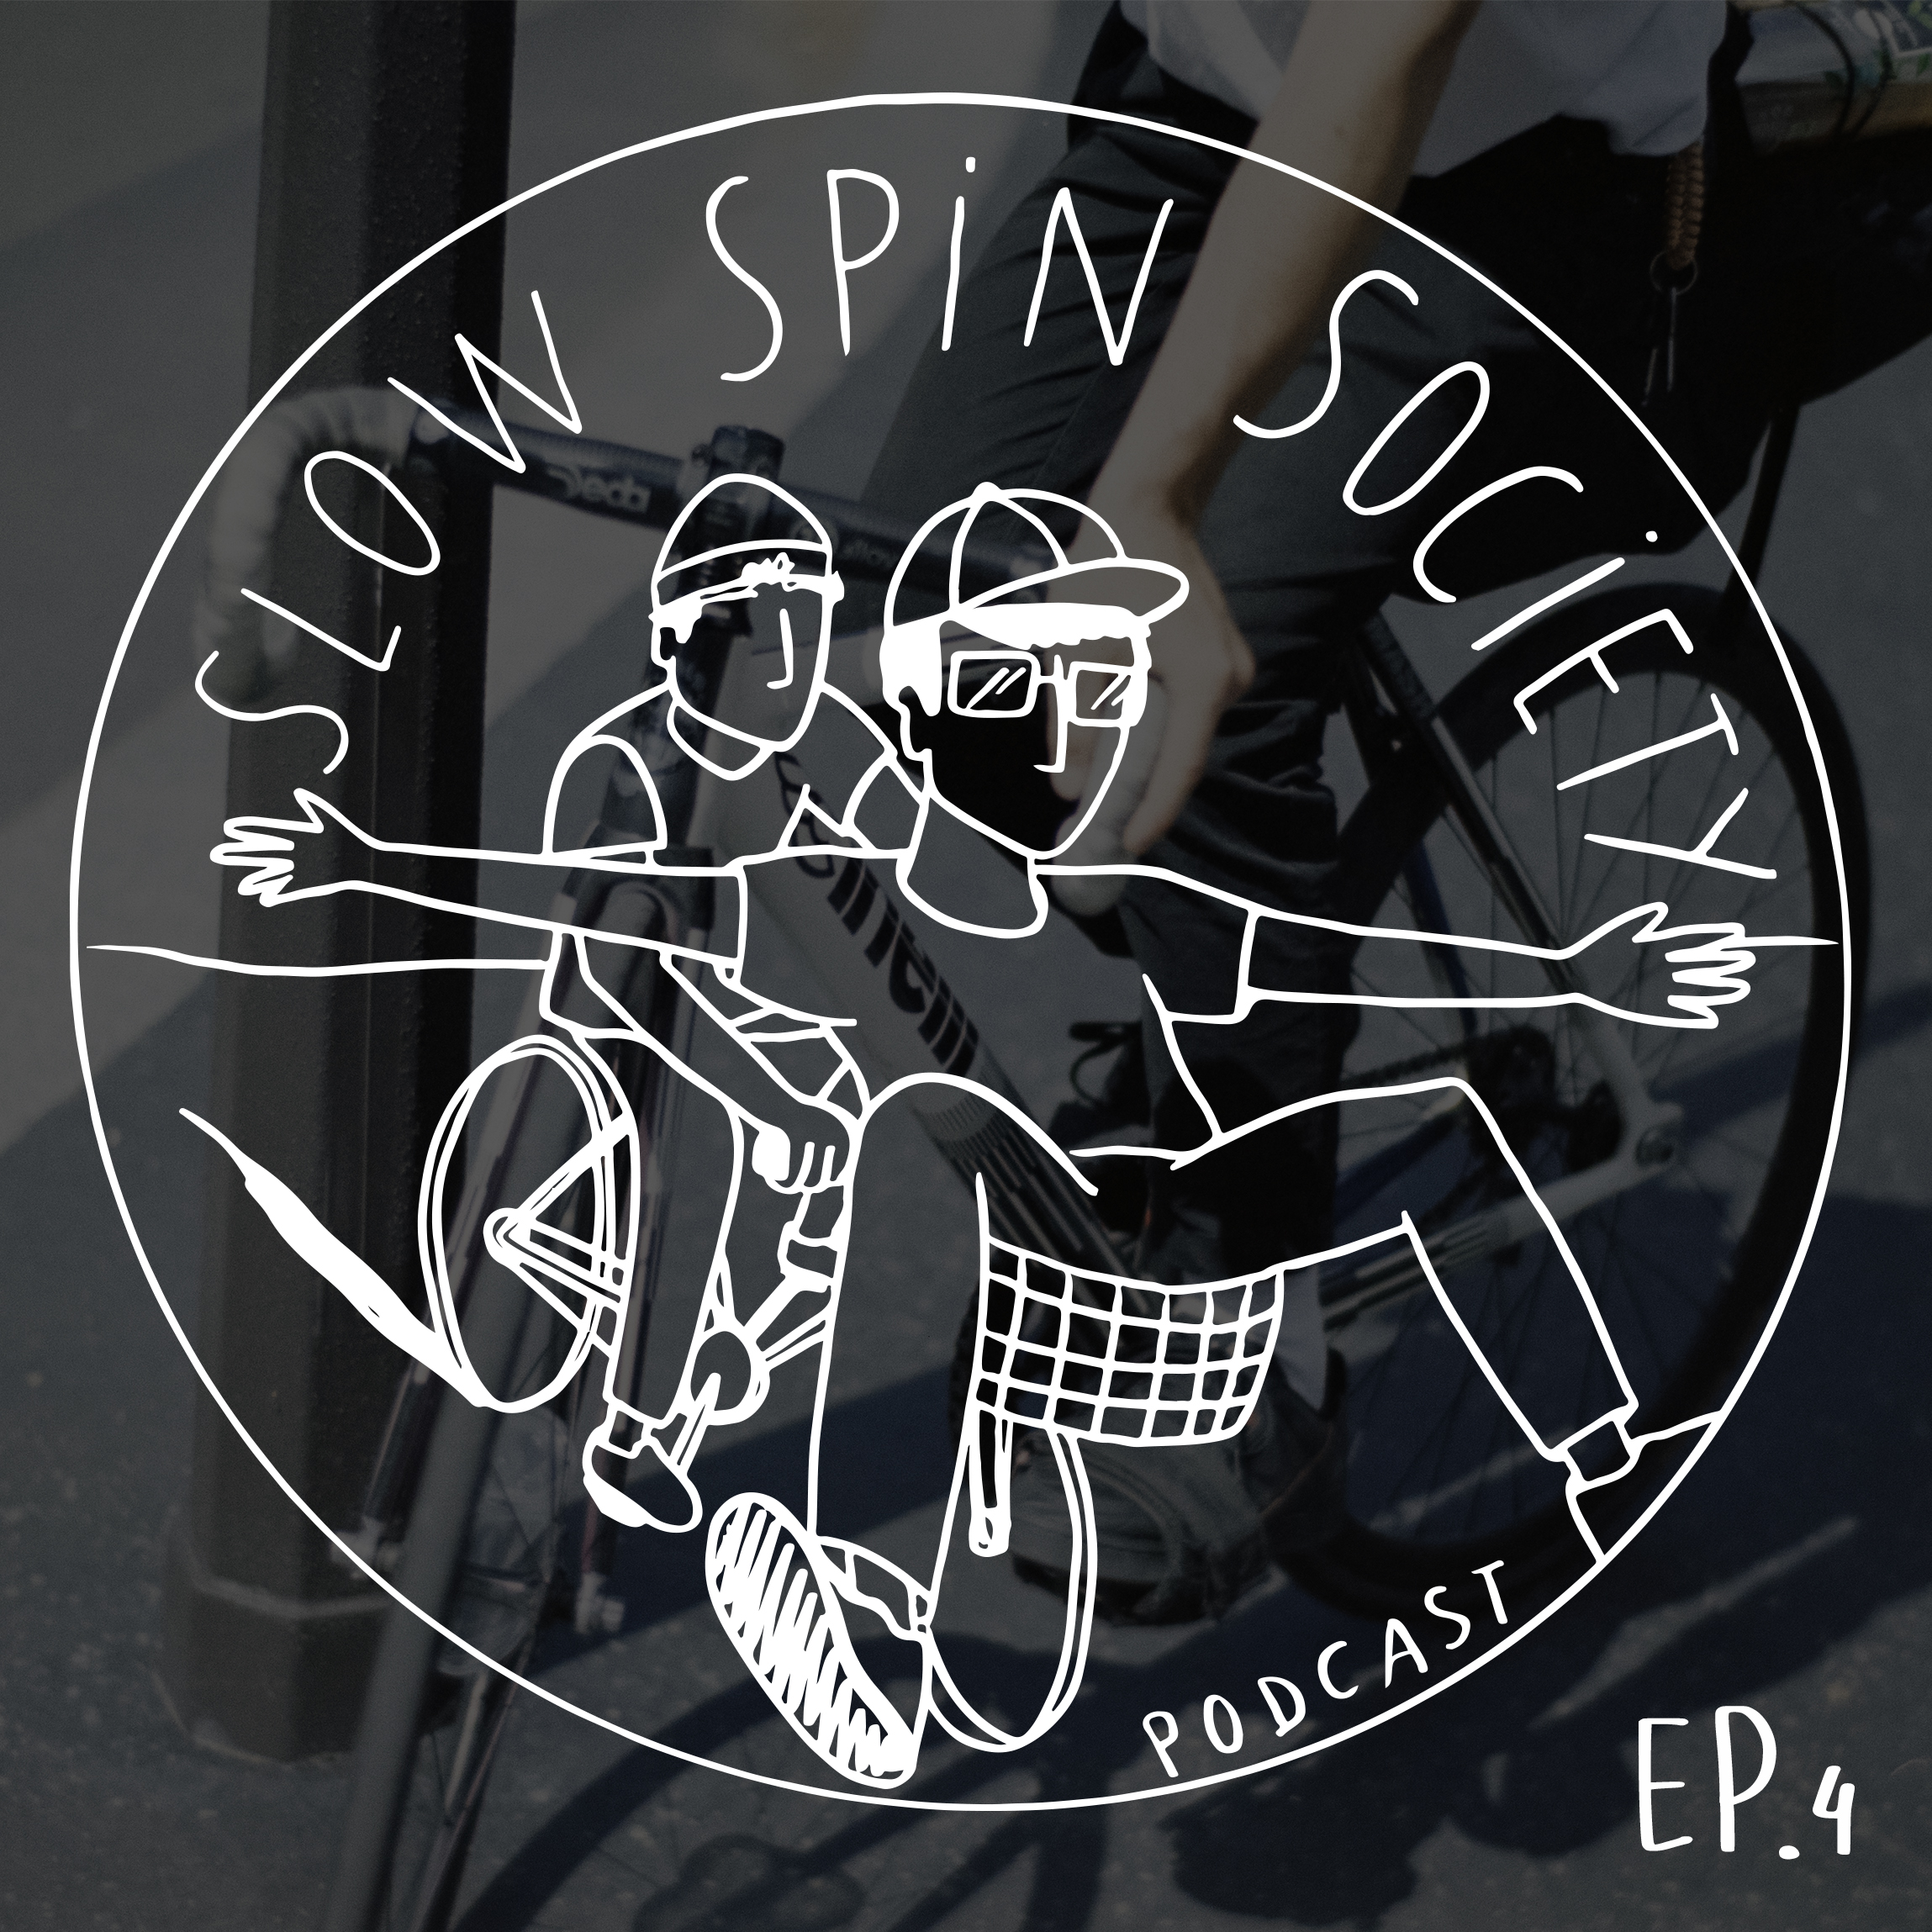 The Slow Spin Society Podcast Ep.4 : Riding tips, missed opportunities and group rides